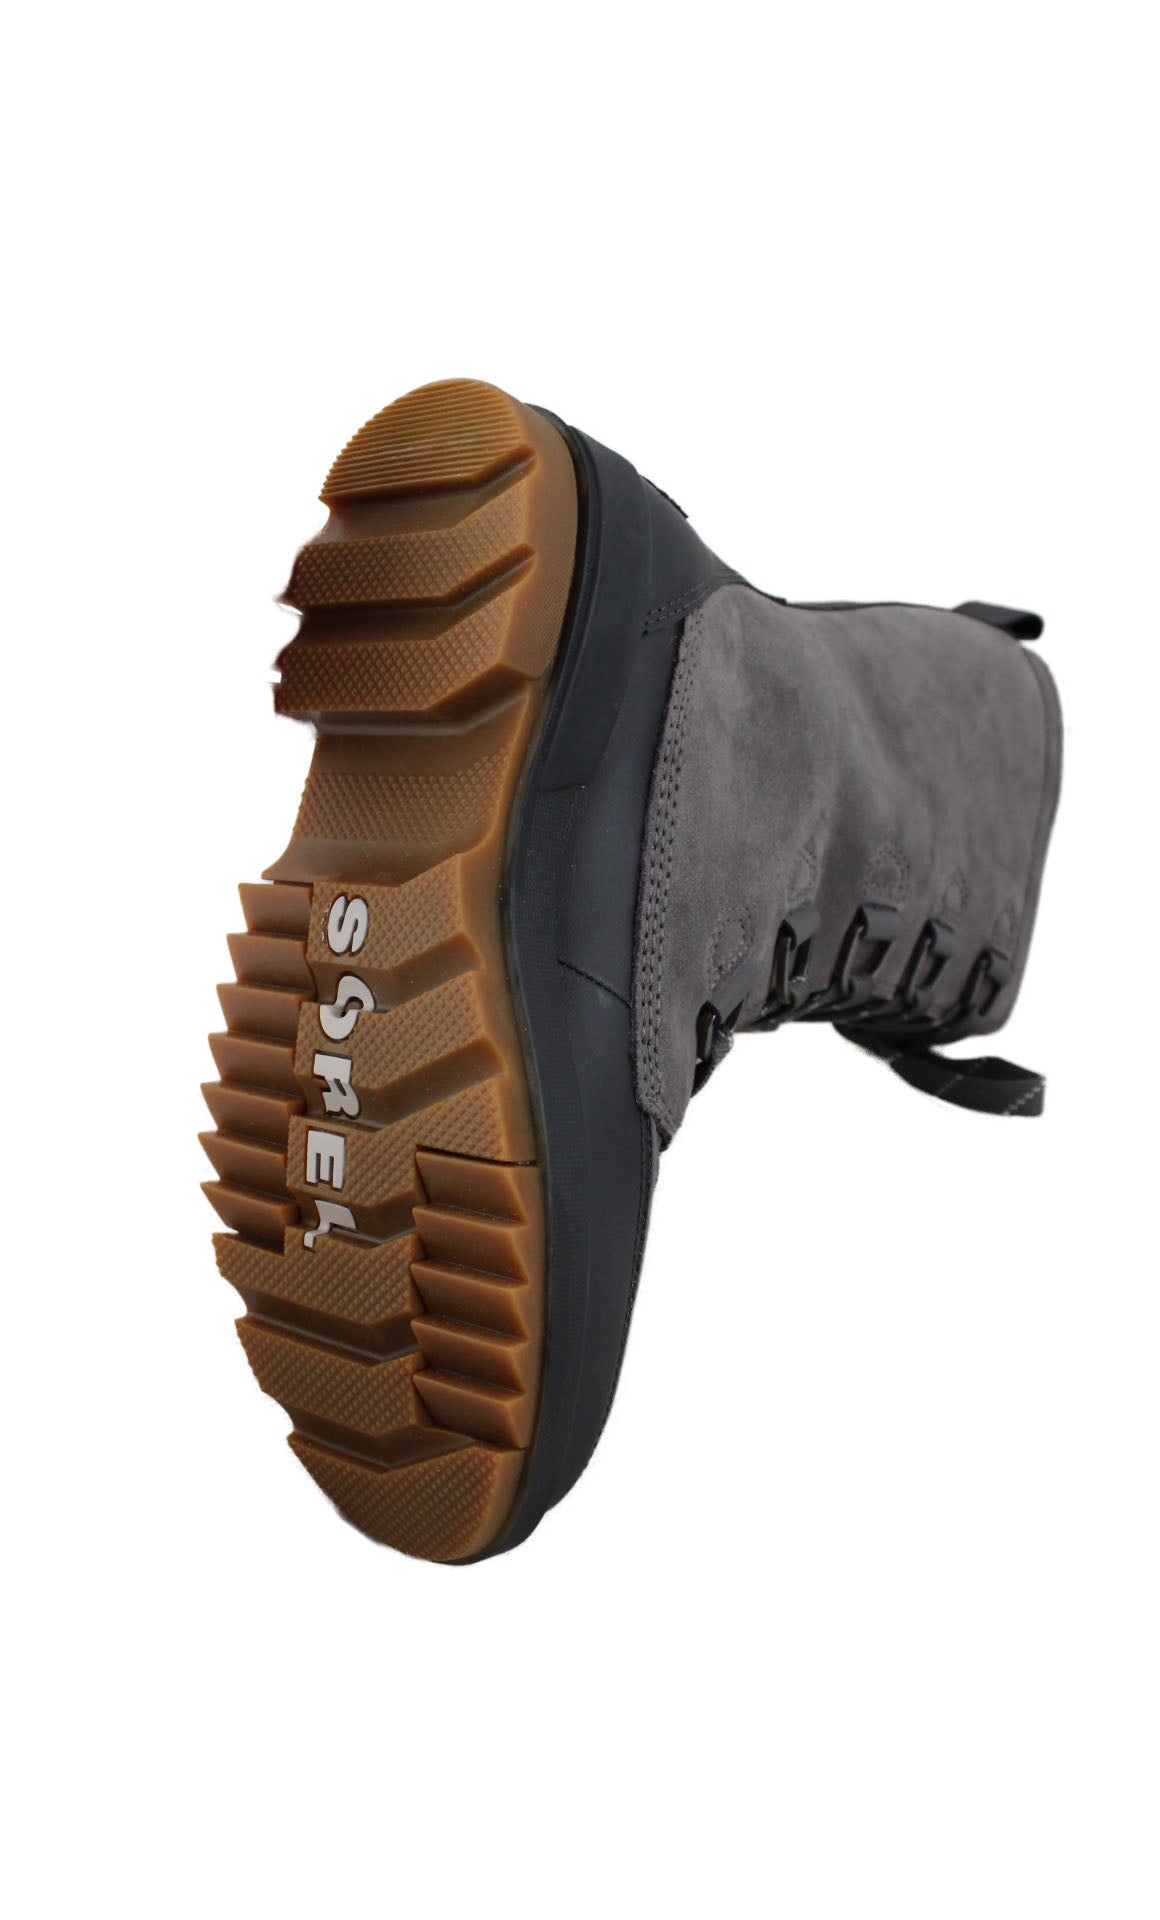 sorel tivoli grey snow boots. features rubber midsole and outsole, round toe silhouette, footbed with die cut PU, microfleece top cover, 100g insulation. upper has waterproof suede and PU coated leather combination with faux fur collar, microfleece lining, and outdry waterproof construction. 